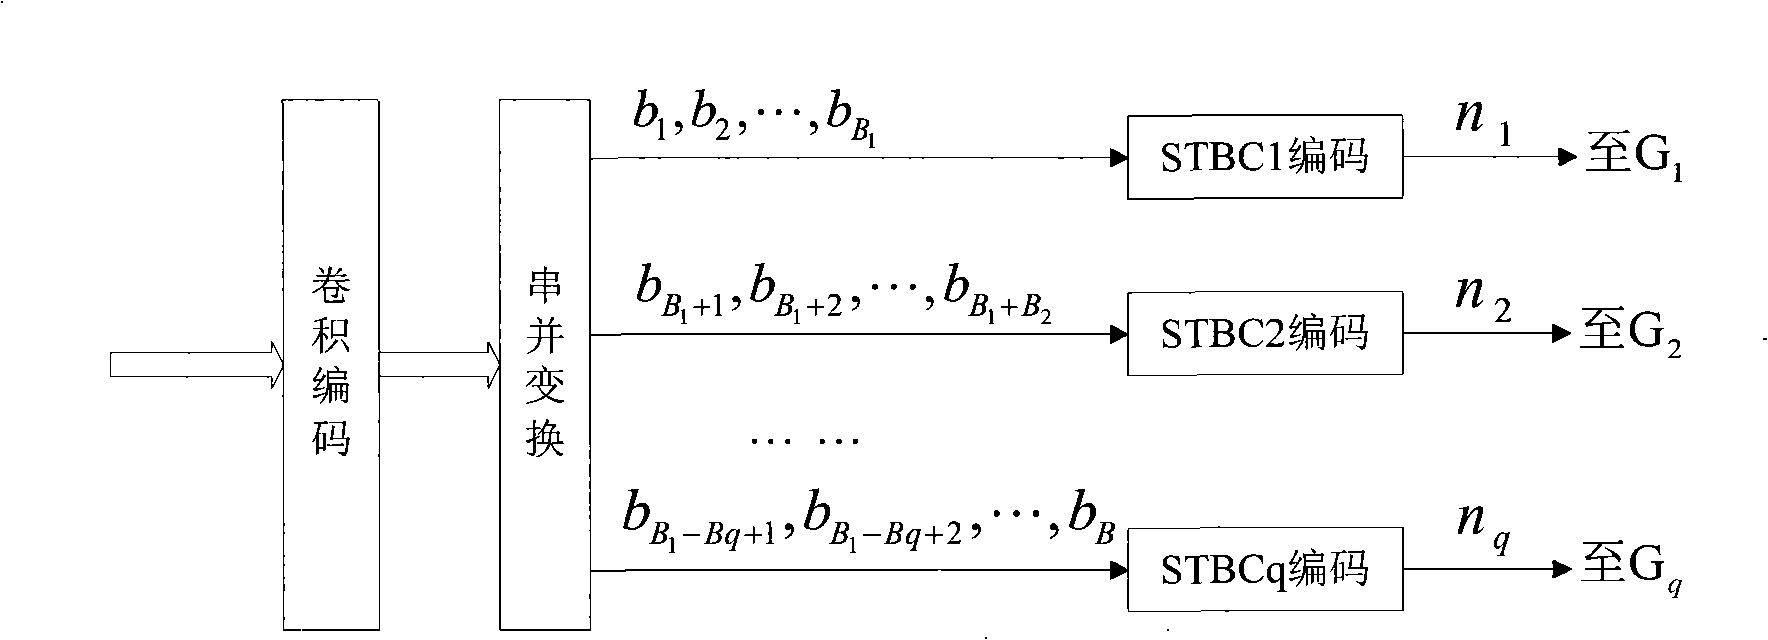 Decoding method based on iterative layered space-time group codes